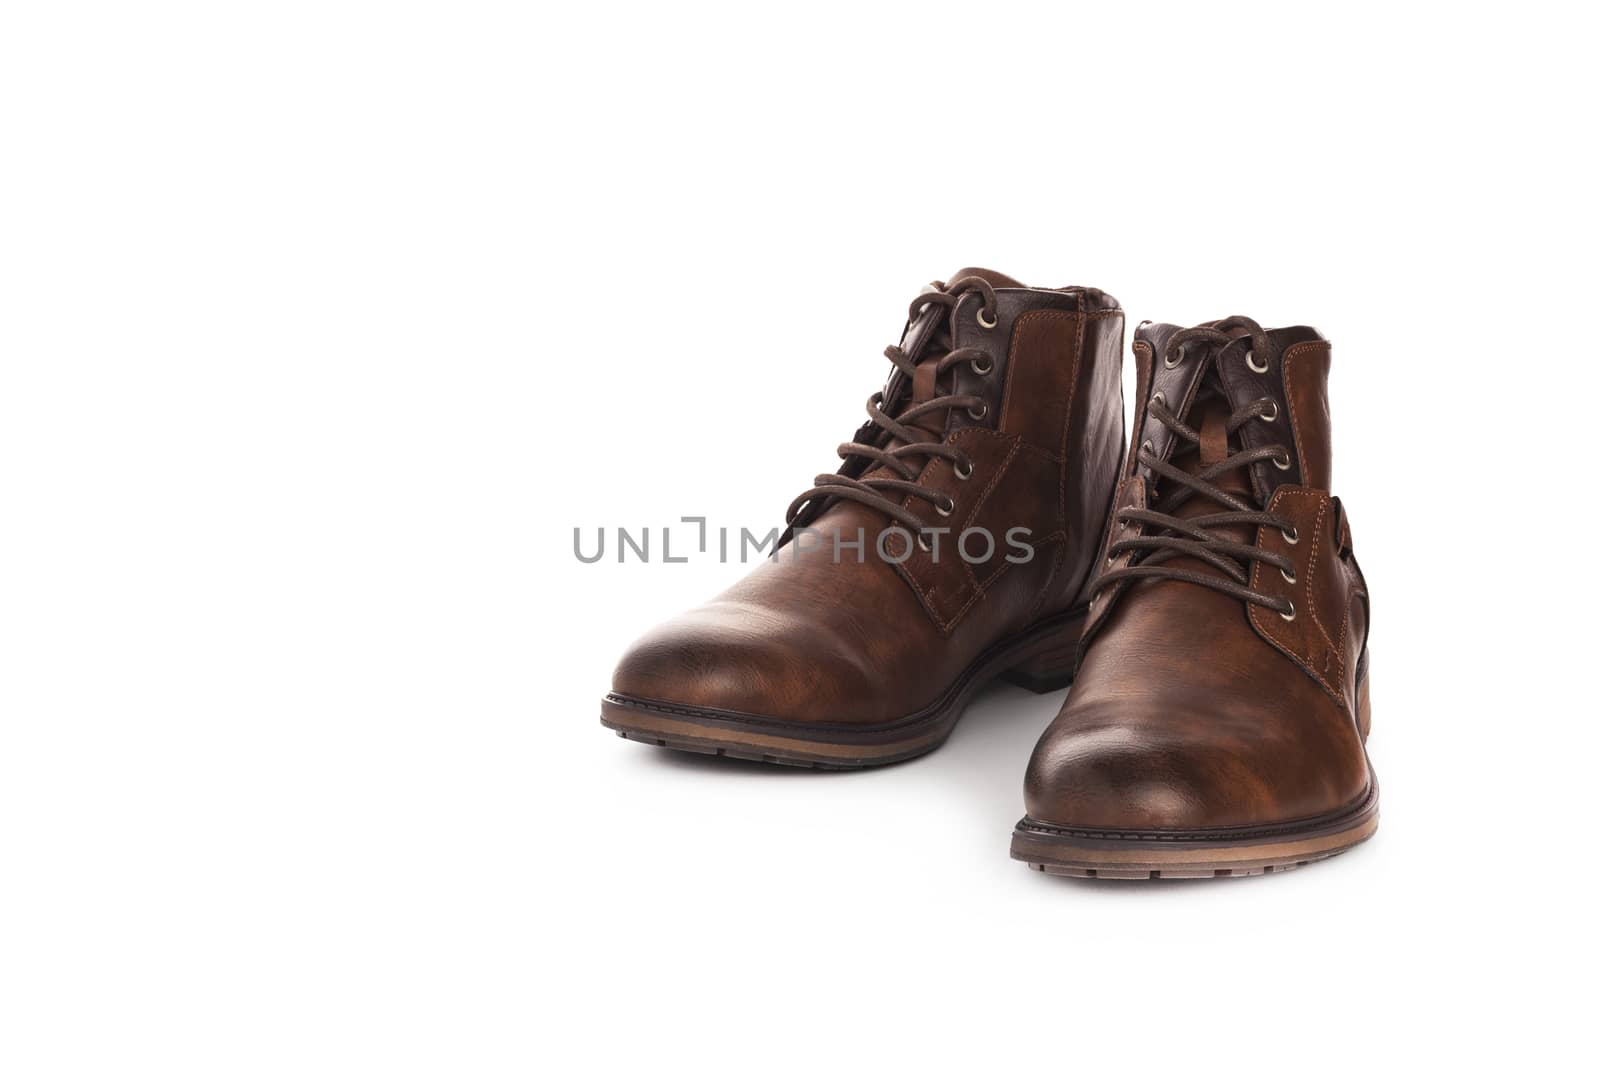 Men's shoes brown color casual. Isolated on white background